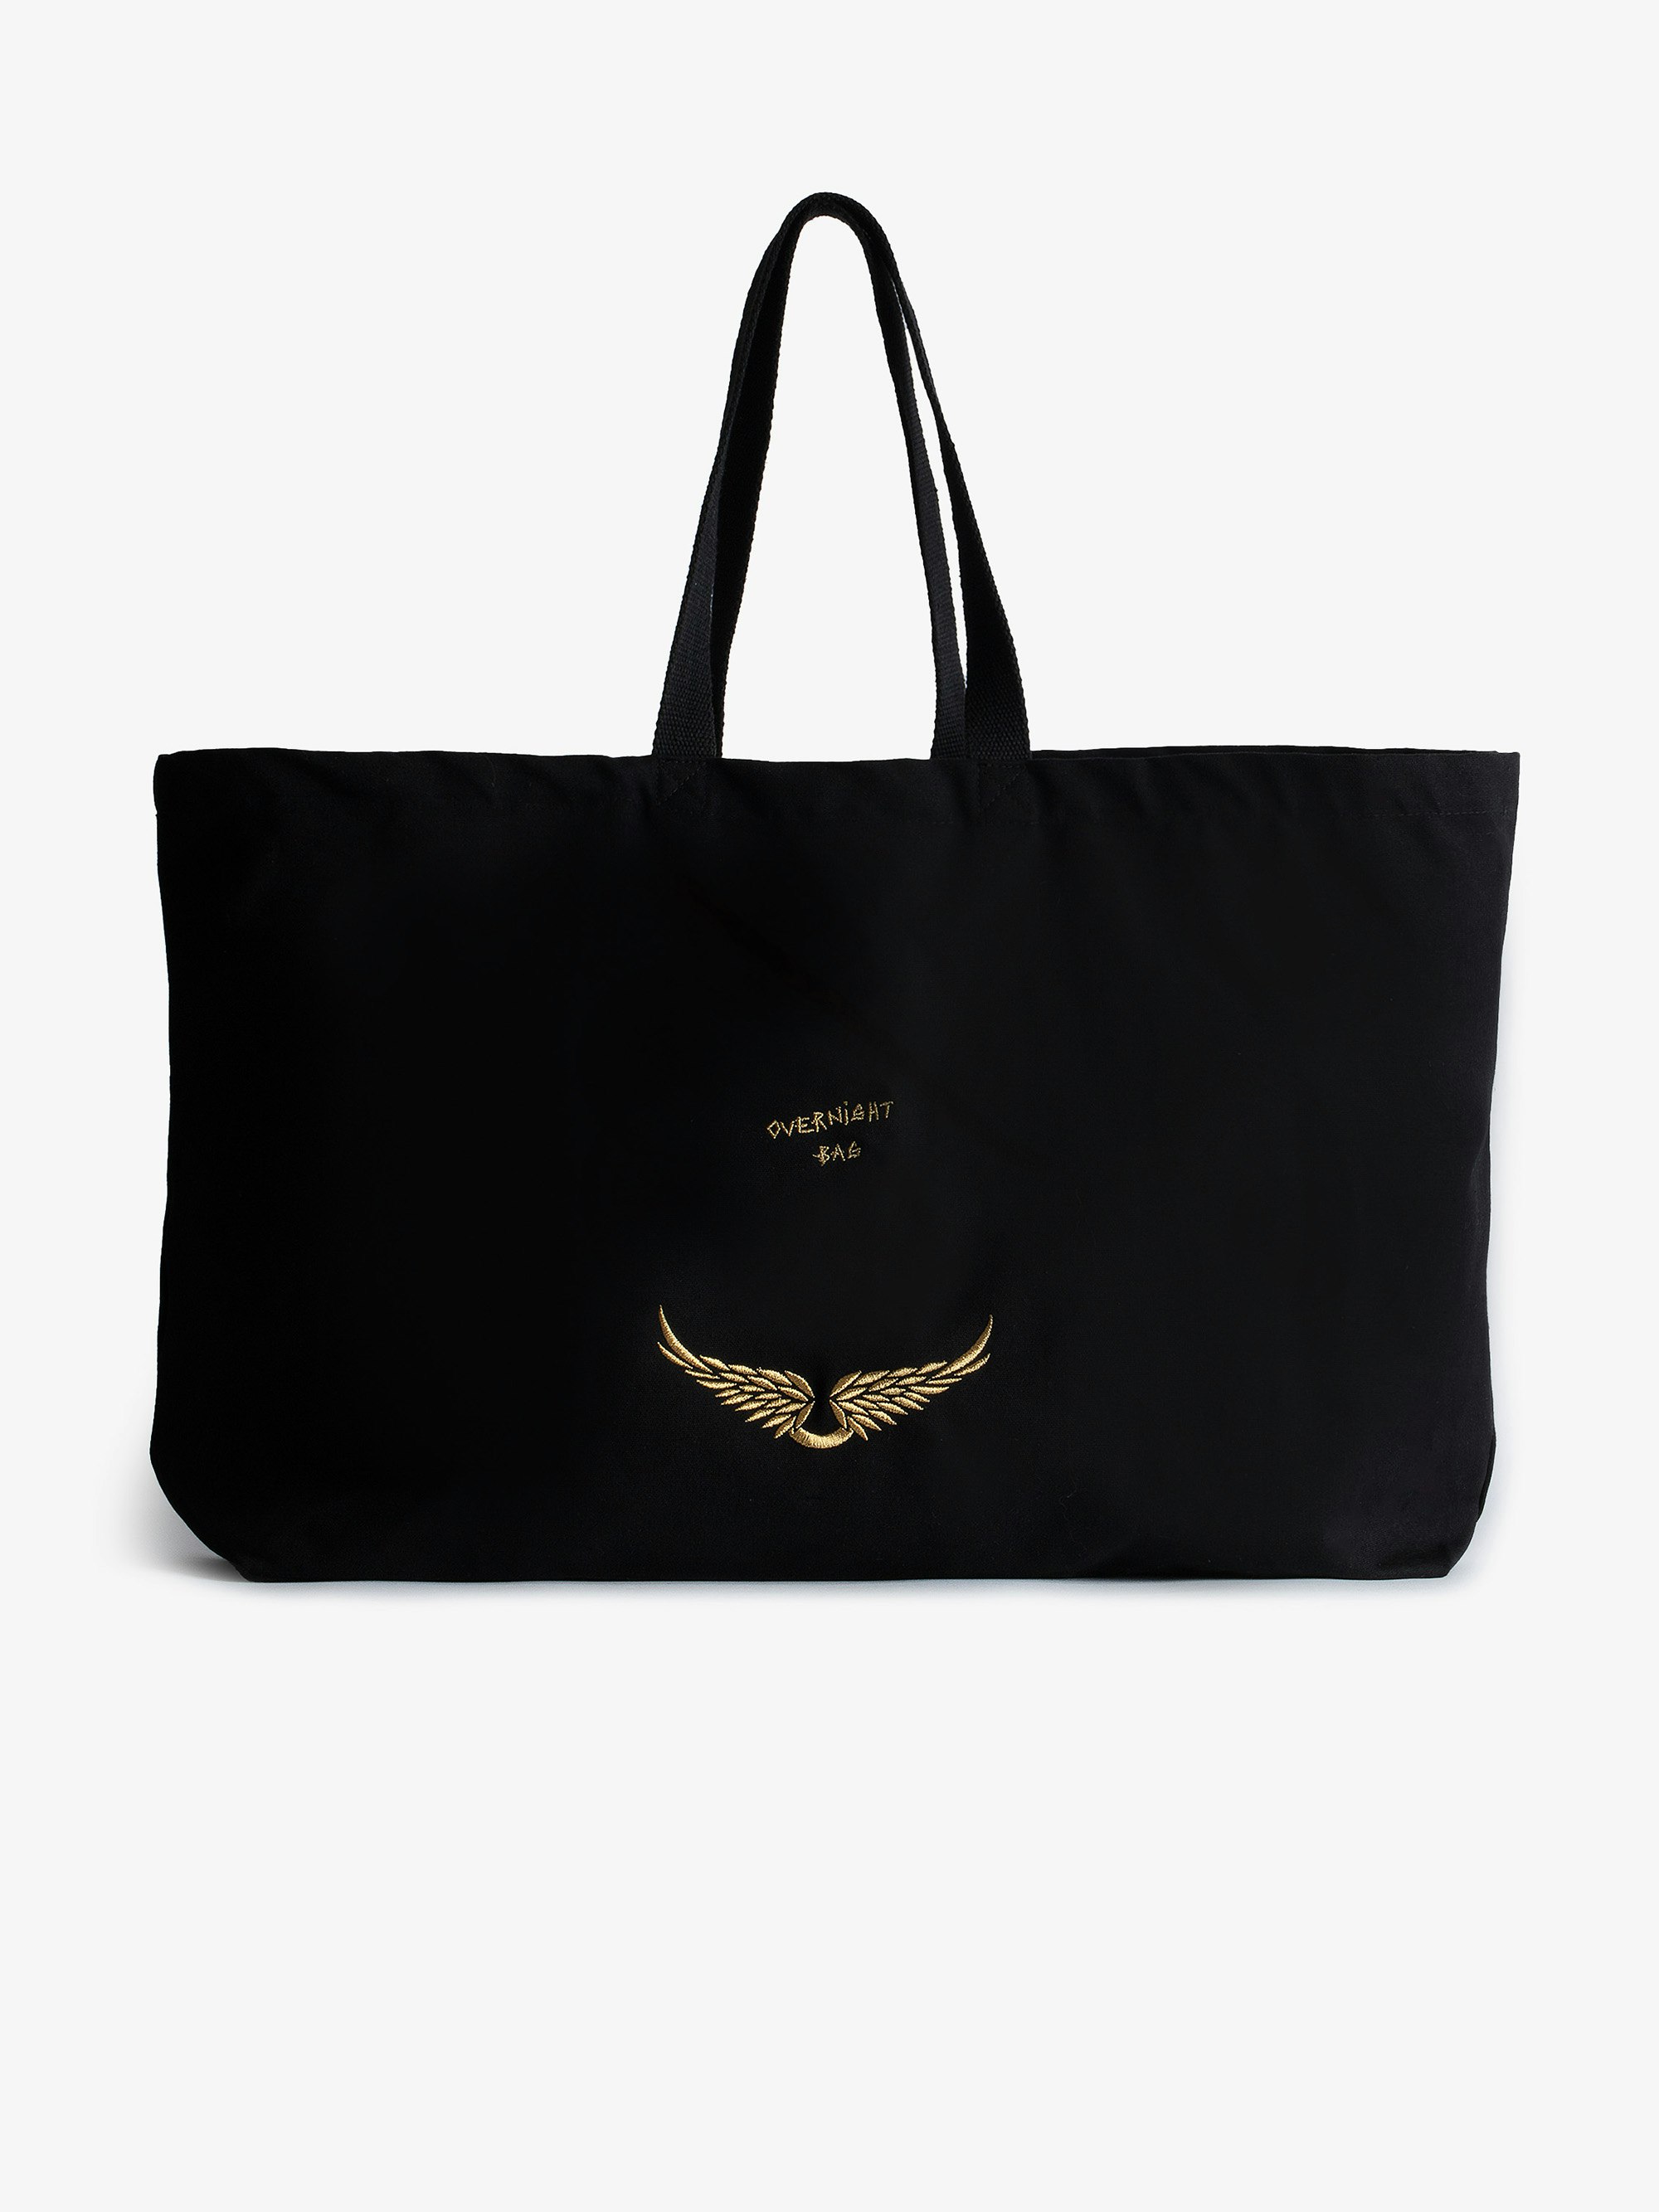 Overnight Tote Bag - Voltaire Vice large black cotton tote bag.